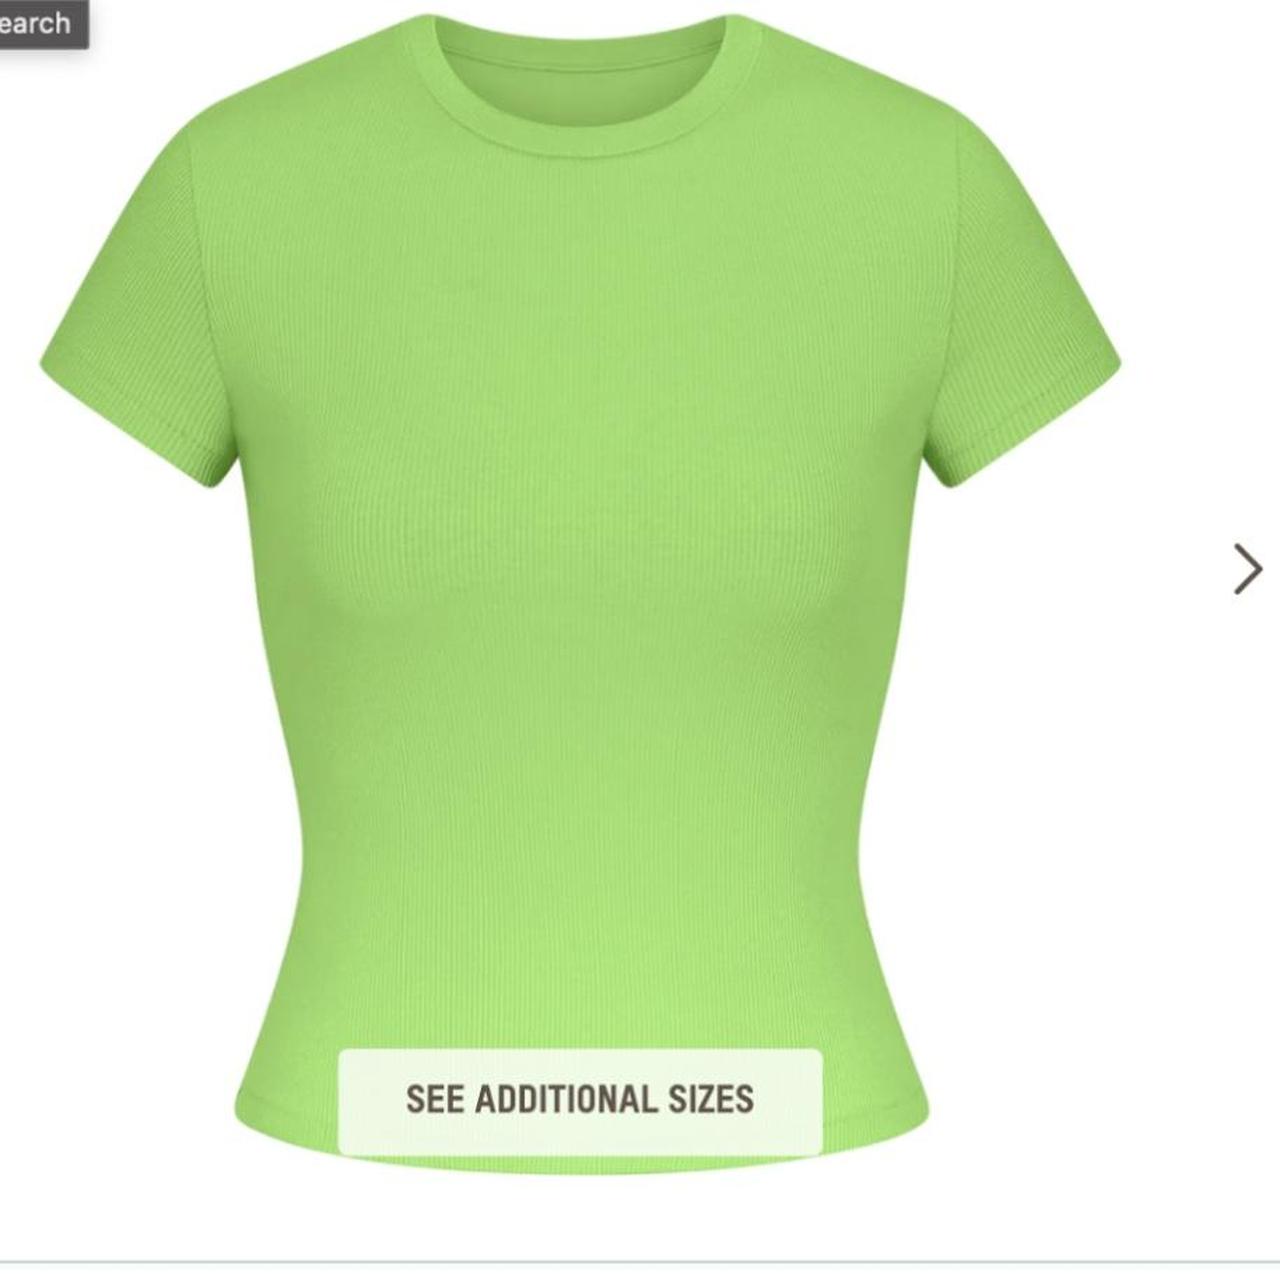 Cotton Rib T Shirt - Neon Green - M is in stock at Skims for $46.00 : r